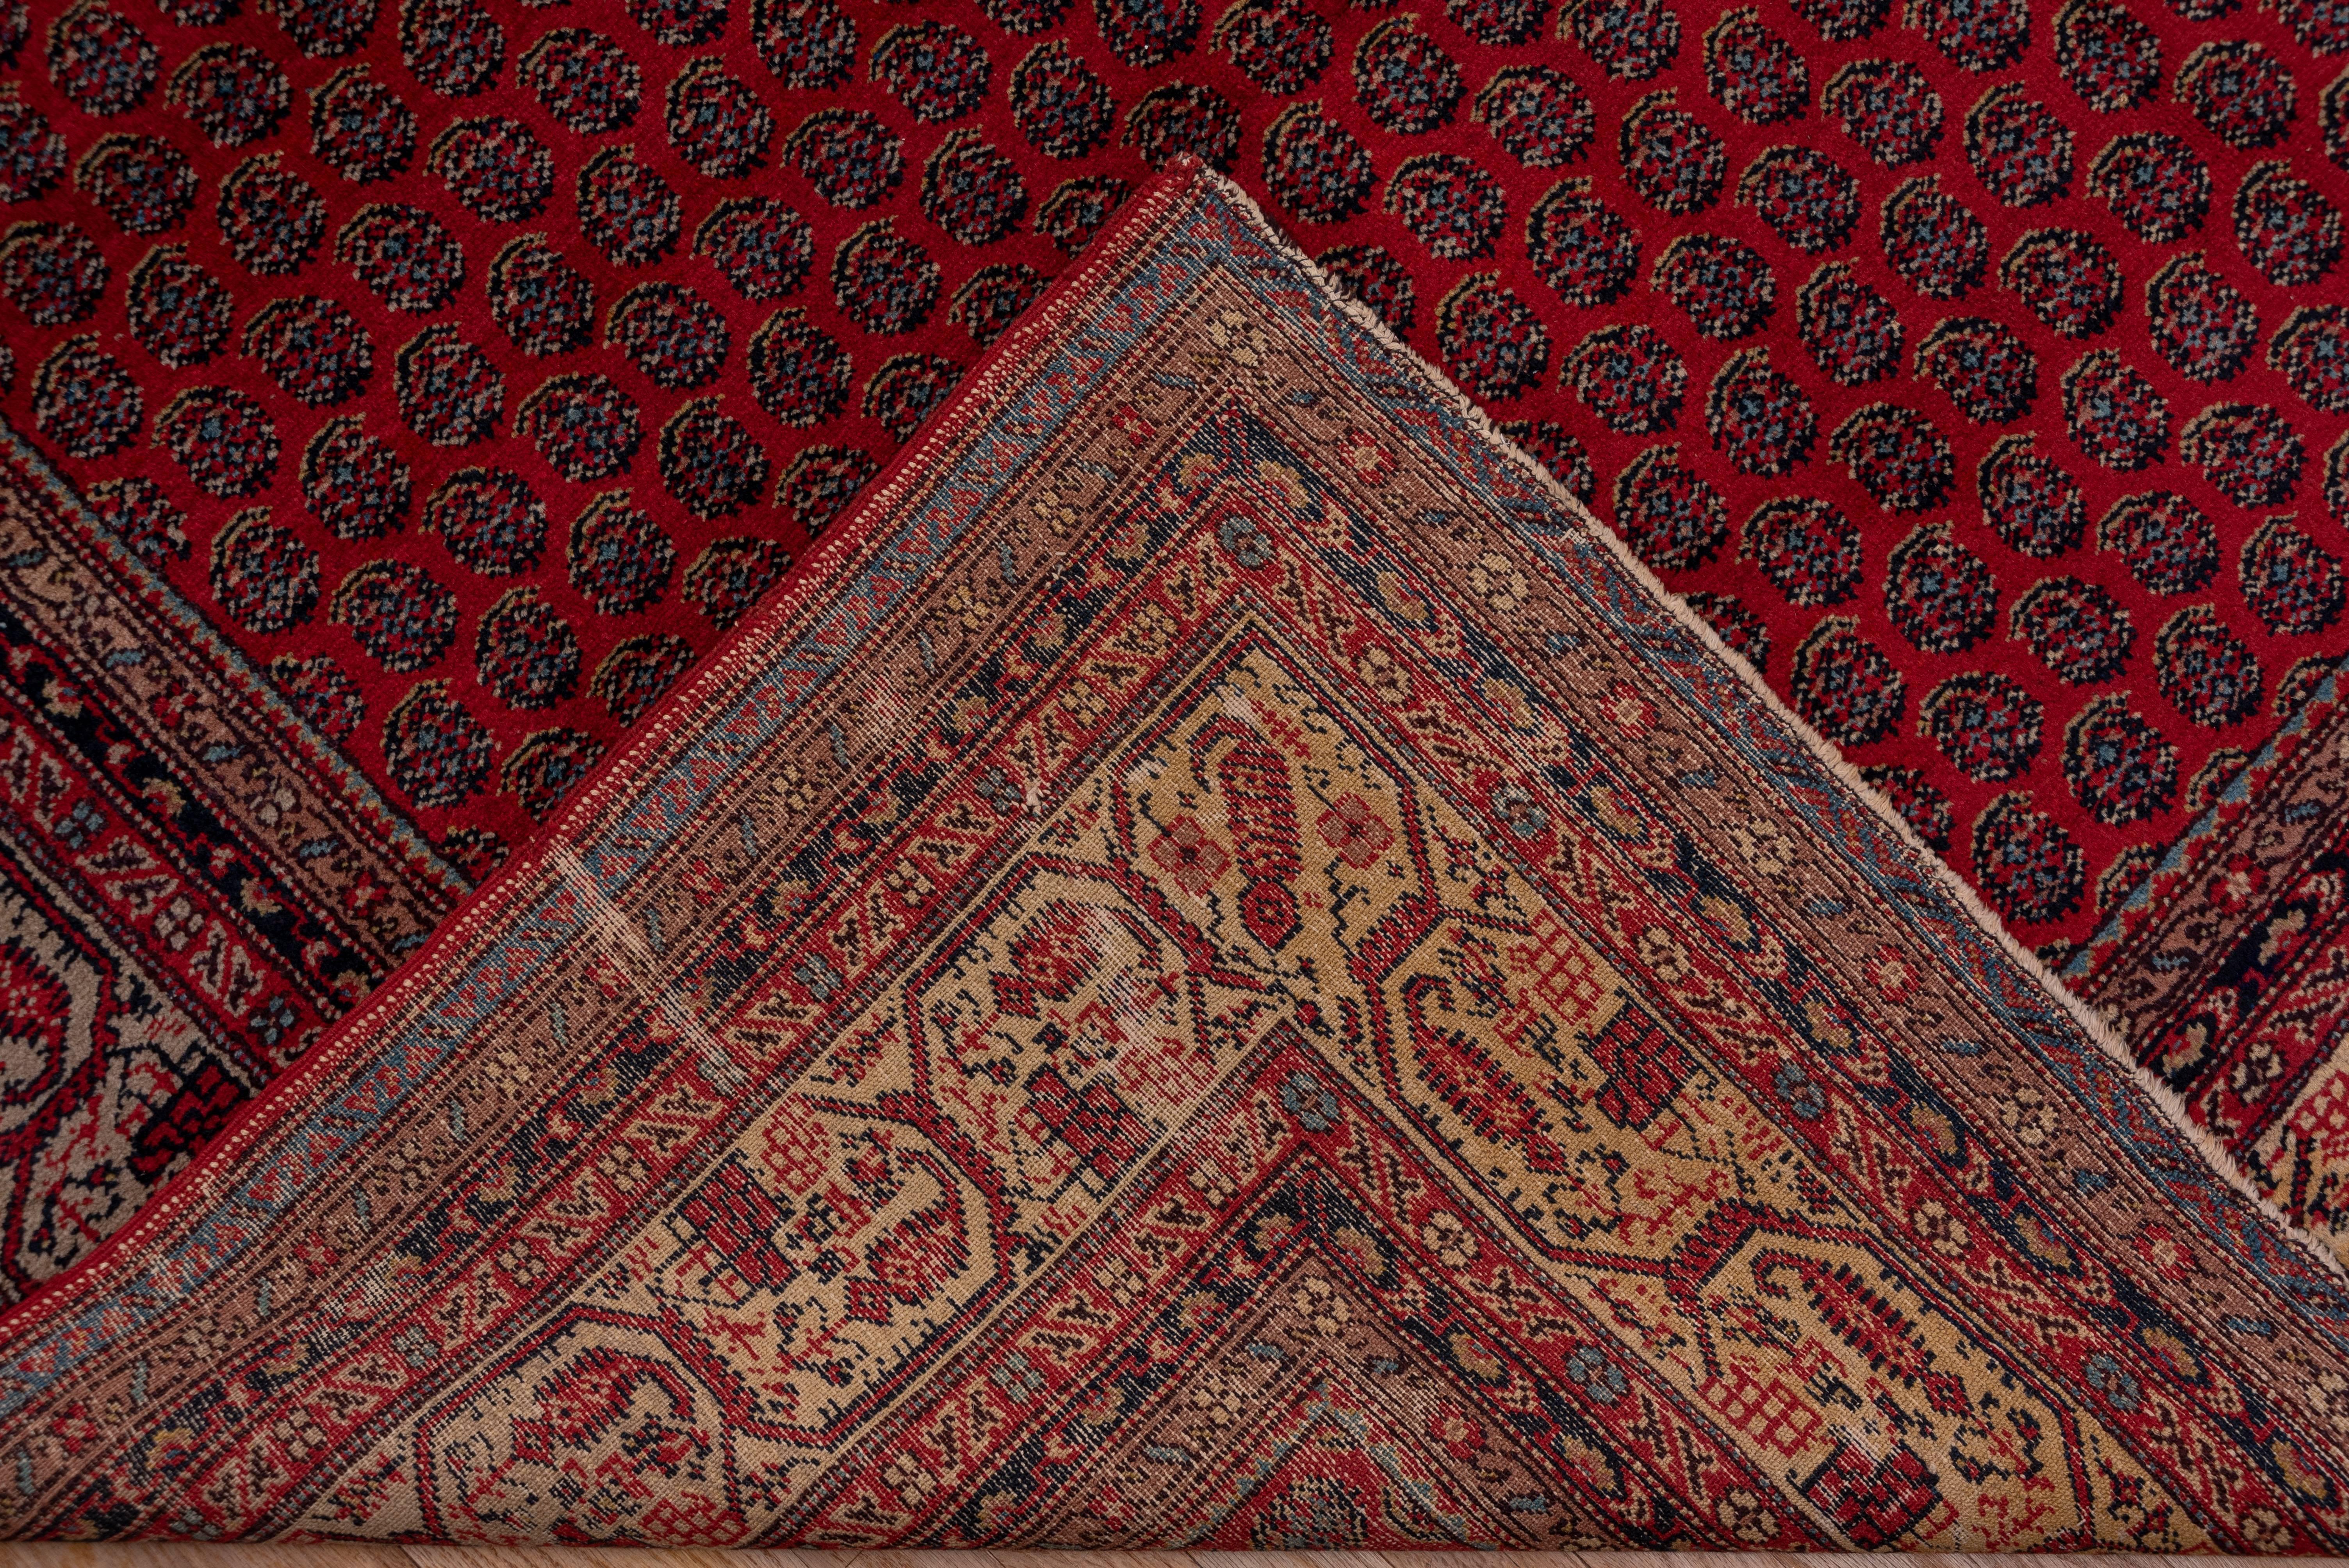 Antique Persian Saraband Carpet, Red Allover Field, Circa 1930s For Sale 1